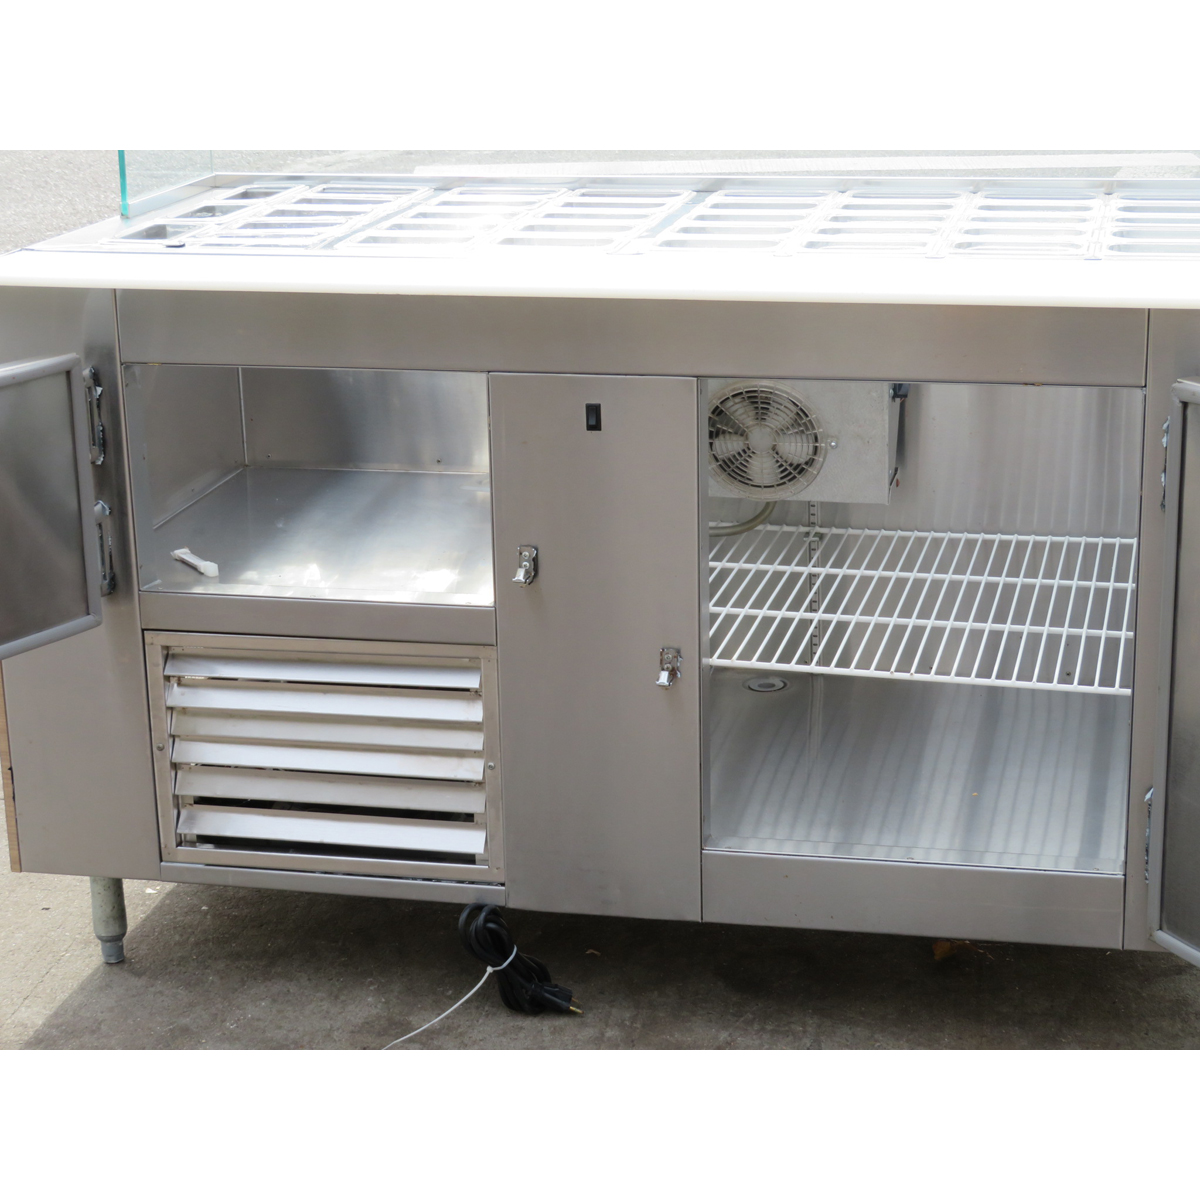 Universal Coolers SC60BM 5 Foot Salad Bar with Sneezeguard, Used Excellent Condition image 4